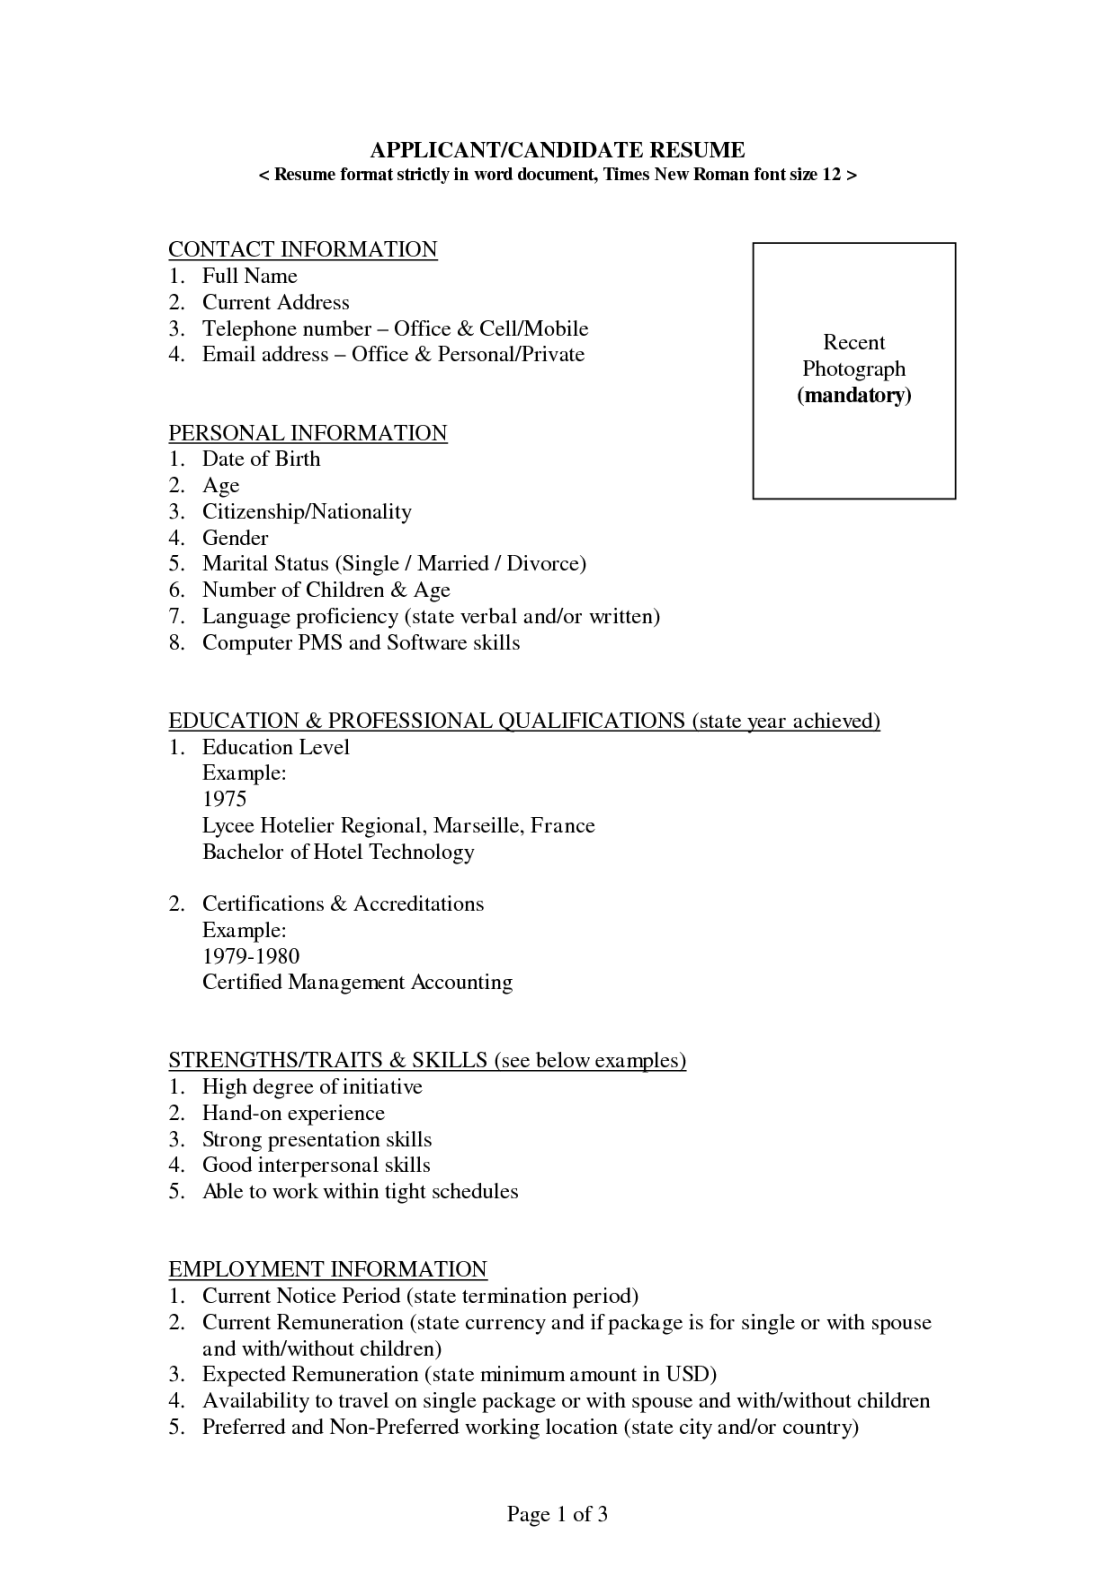 Resume Format Download In Ms Word  Free CV template for all